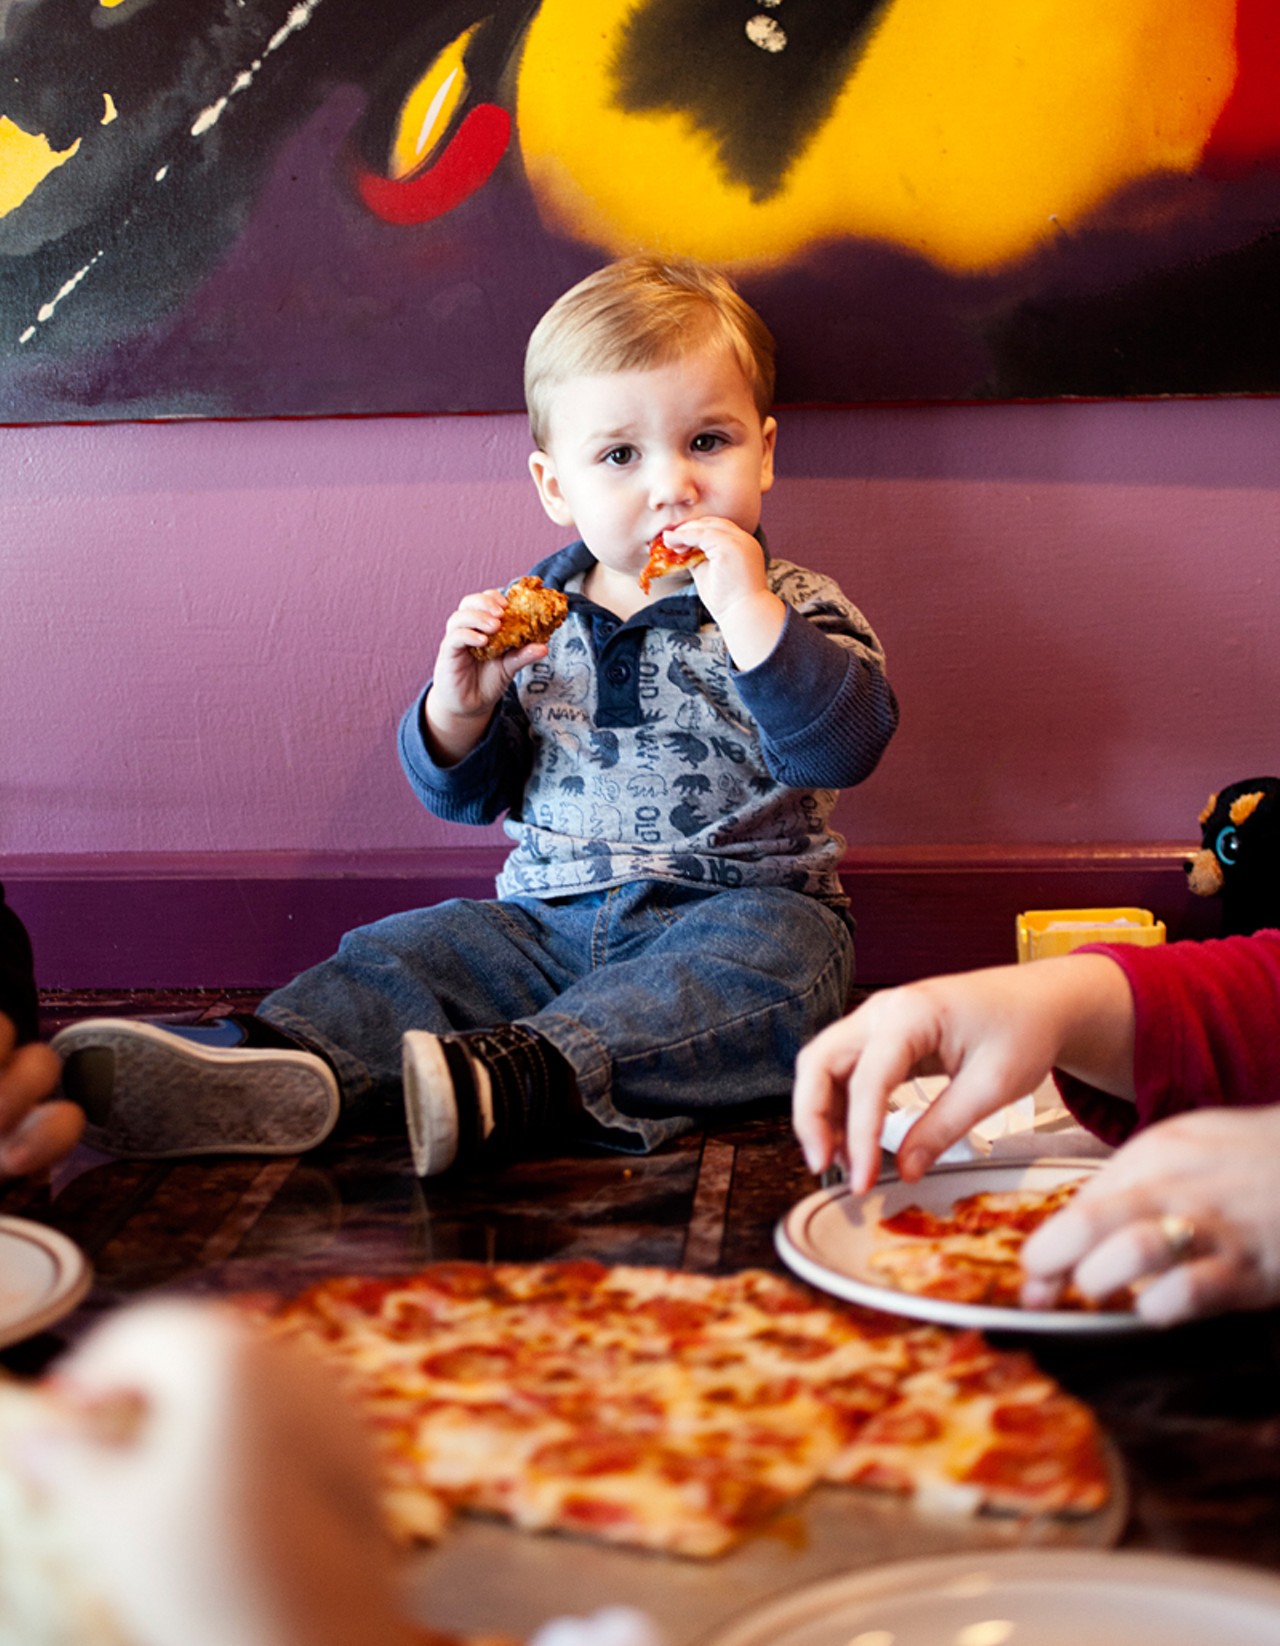 Year-old Nicholas Muratovic is a regular at Mr. X Pizza on Morgan Ford (just south of Bates).